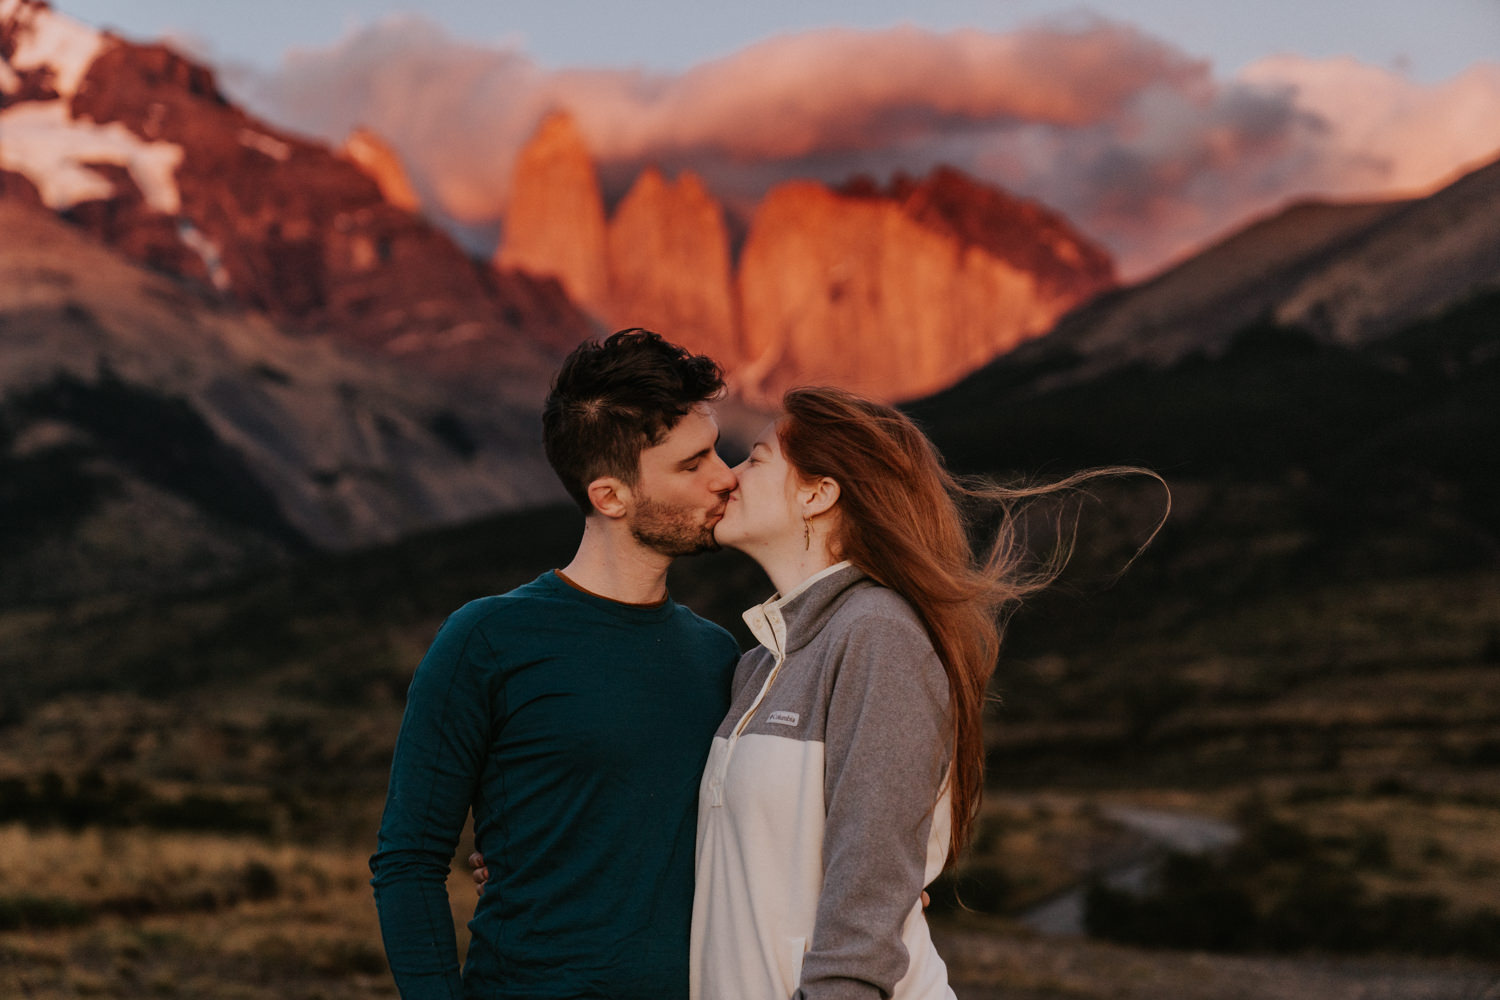 A couple kiss in front of a bright pink Torres del Paine, light by the sunrise alpine glow during their Patagonia elopement.